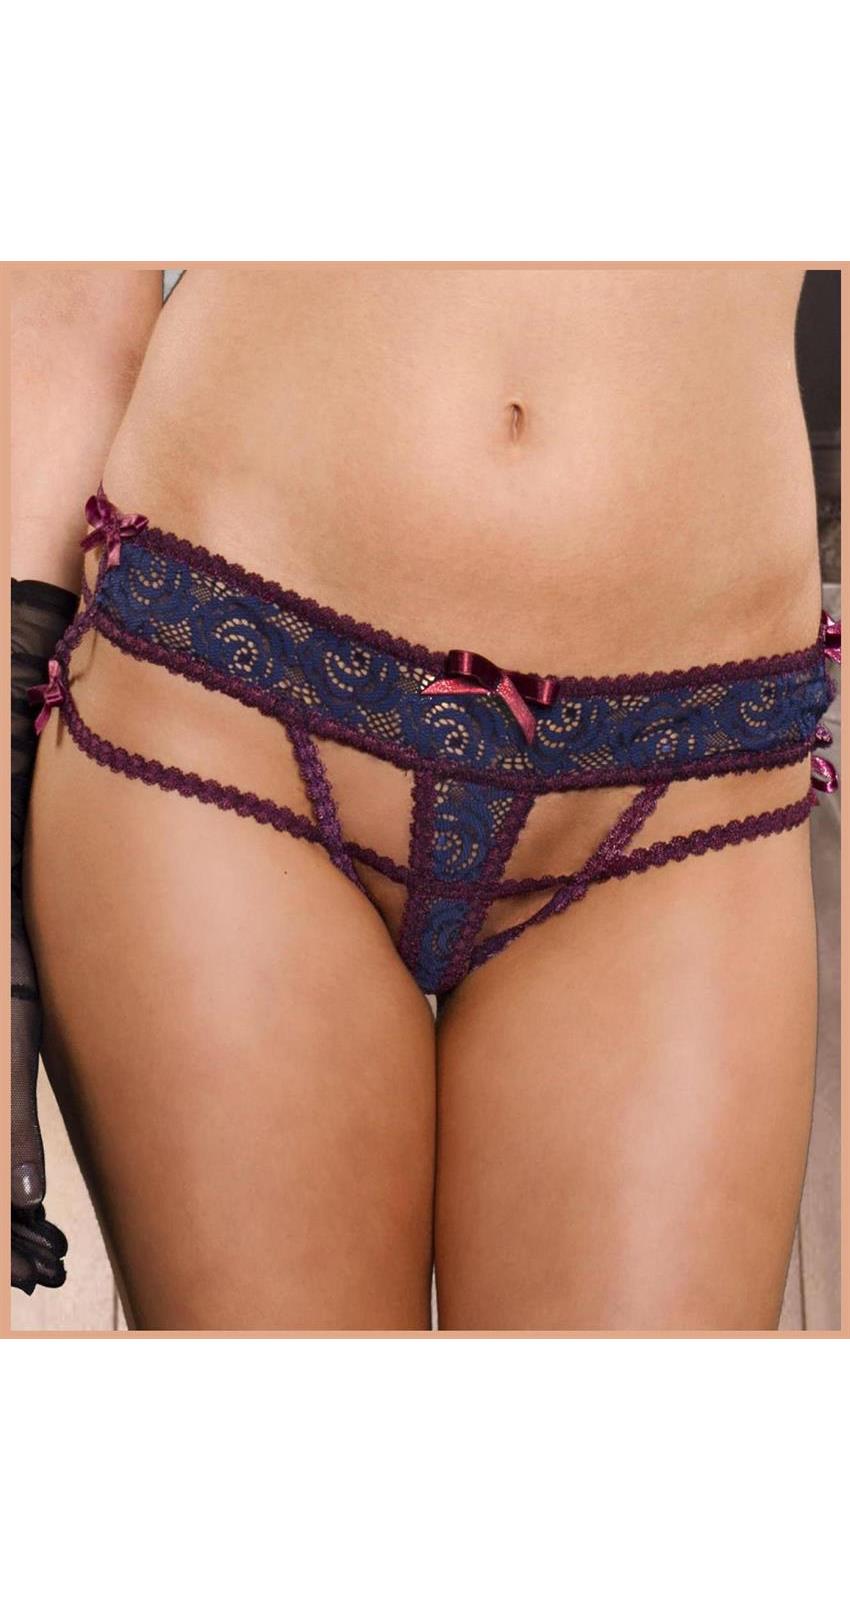 Fearless and Fun (FAF) Women's Victorian G-String CONSTANCE - AS SHOWN - One size